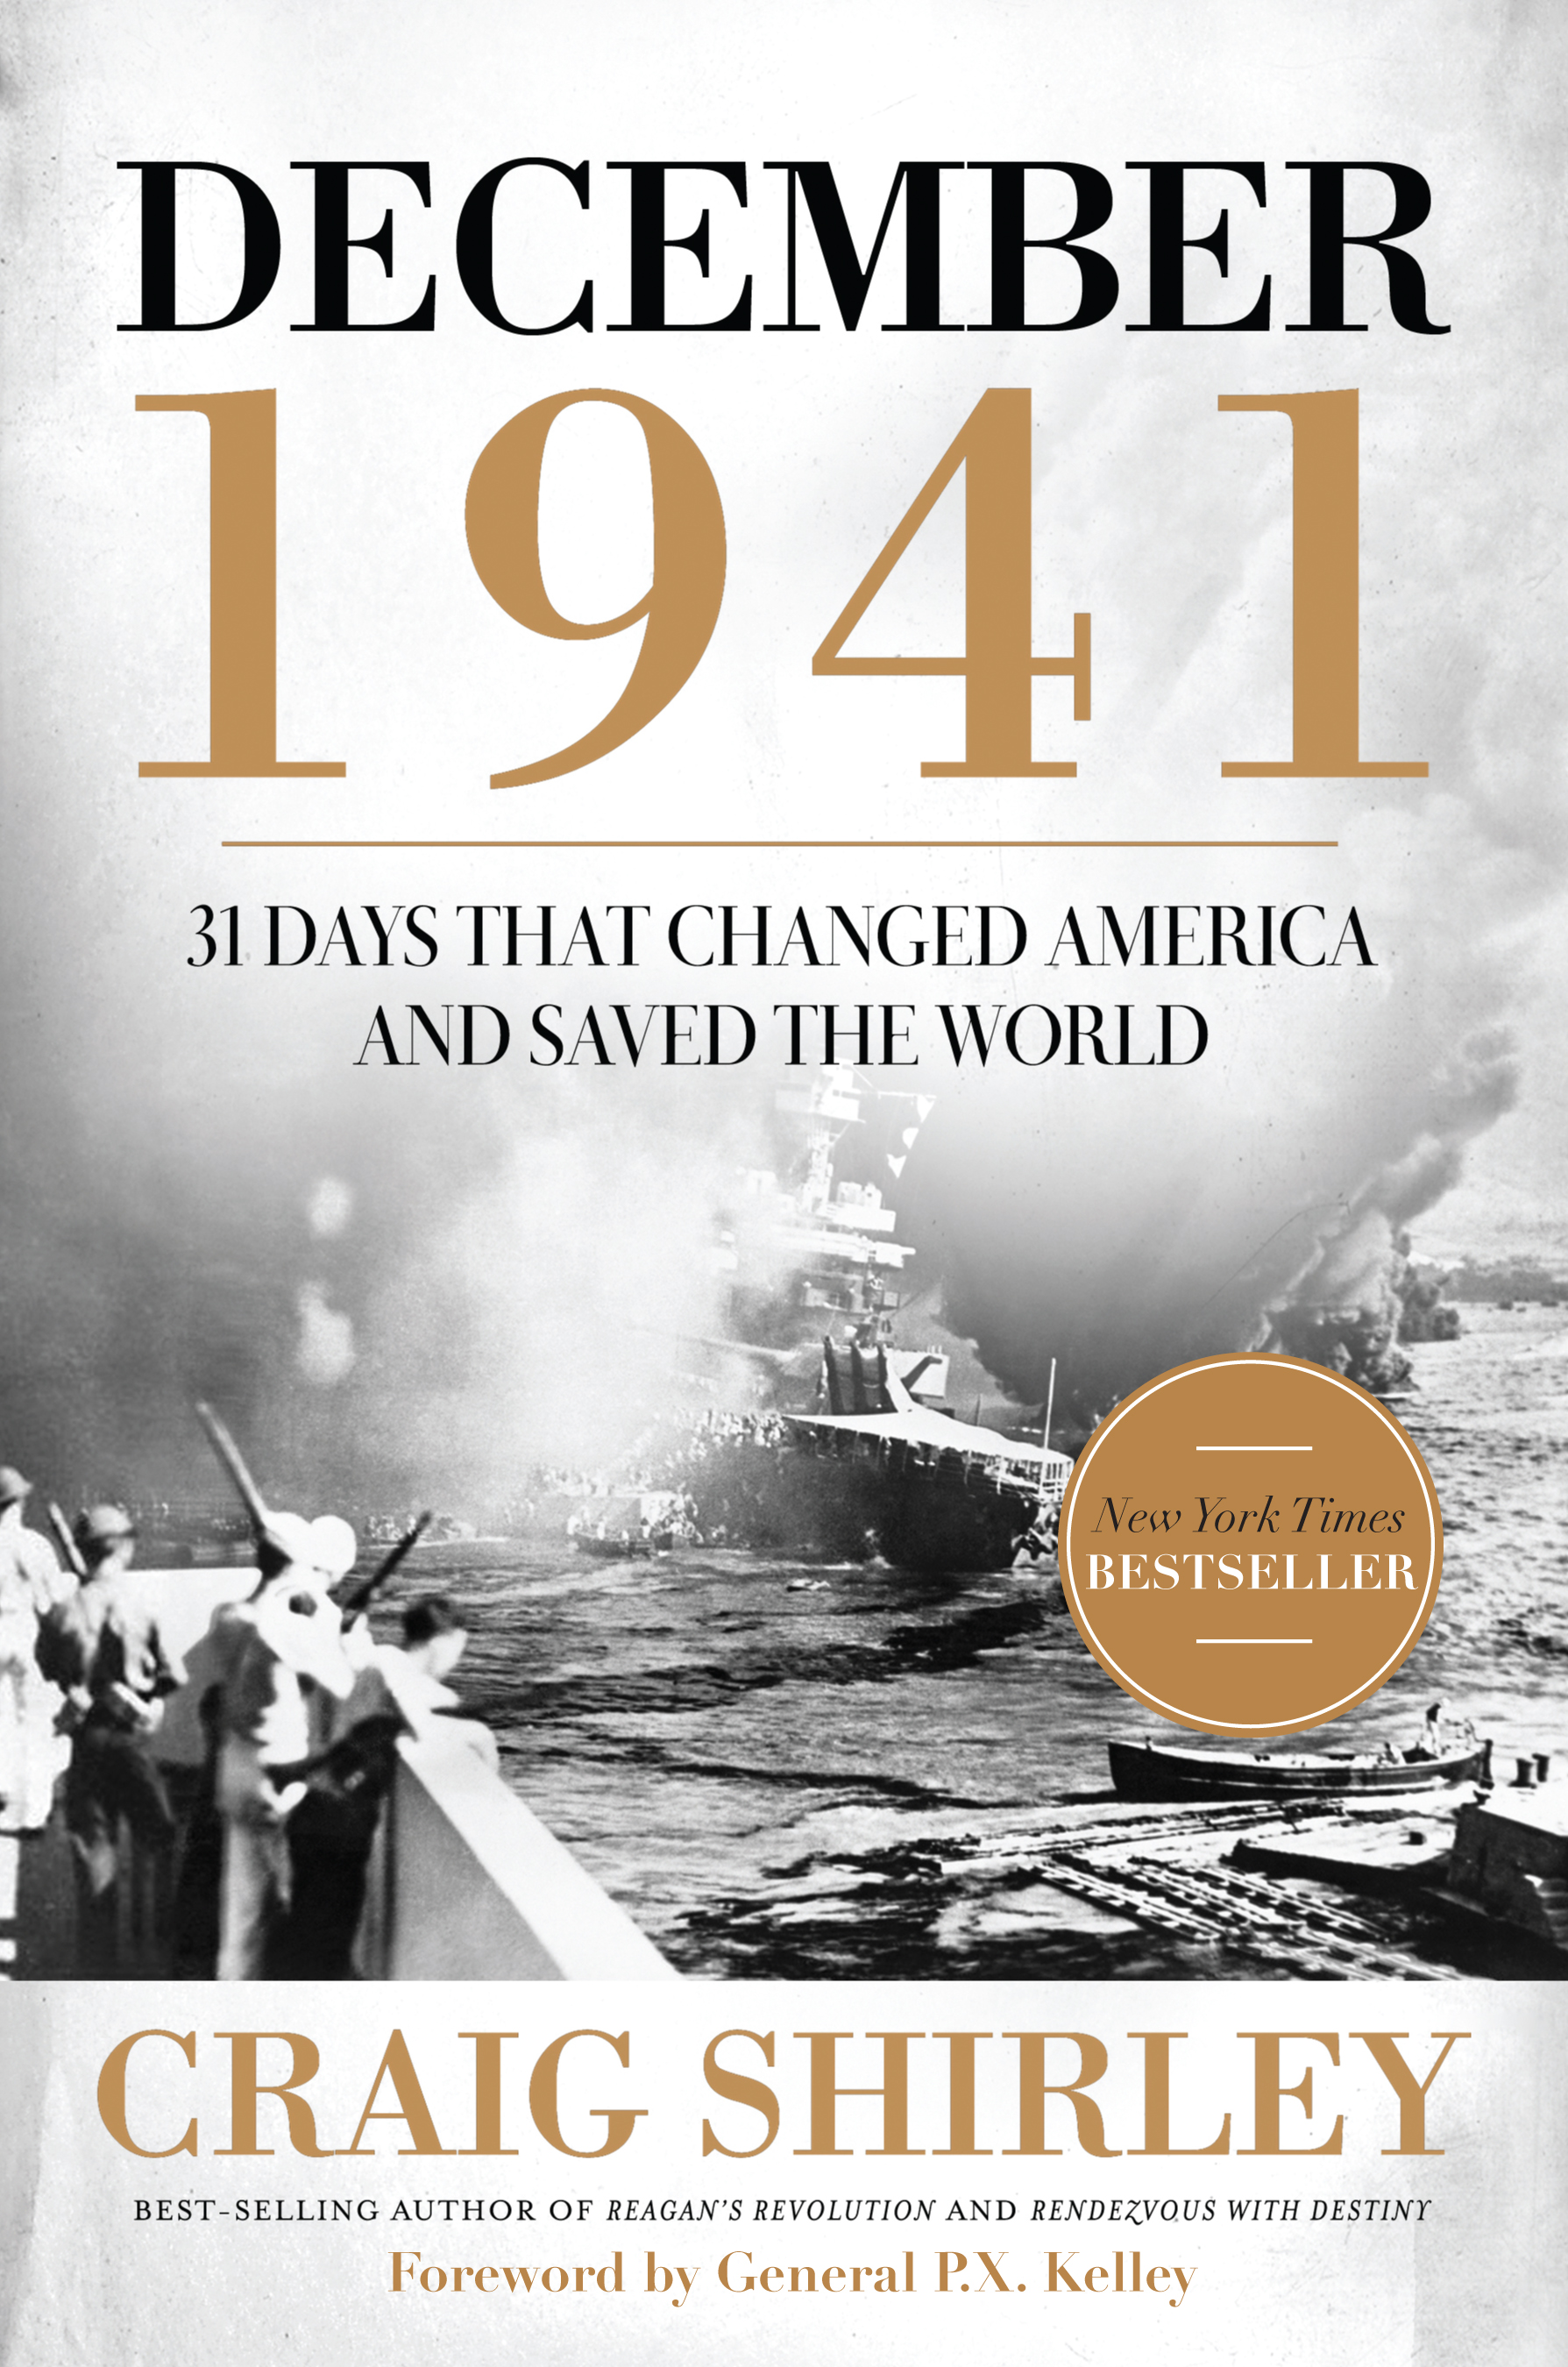 The cover of Craig Shirley's "December 1941."